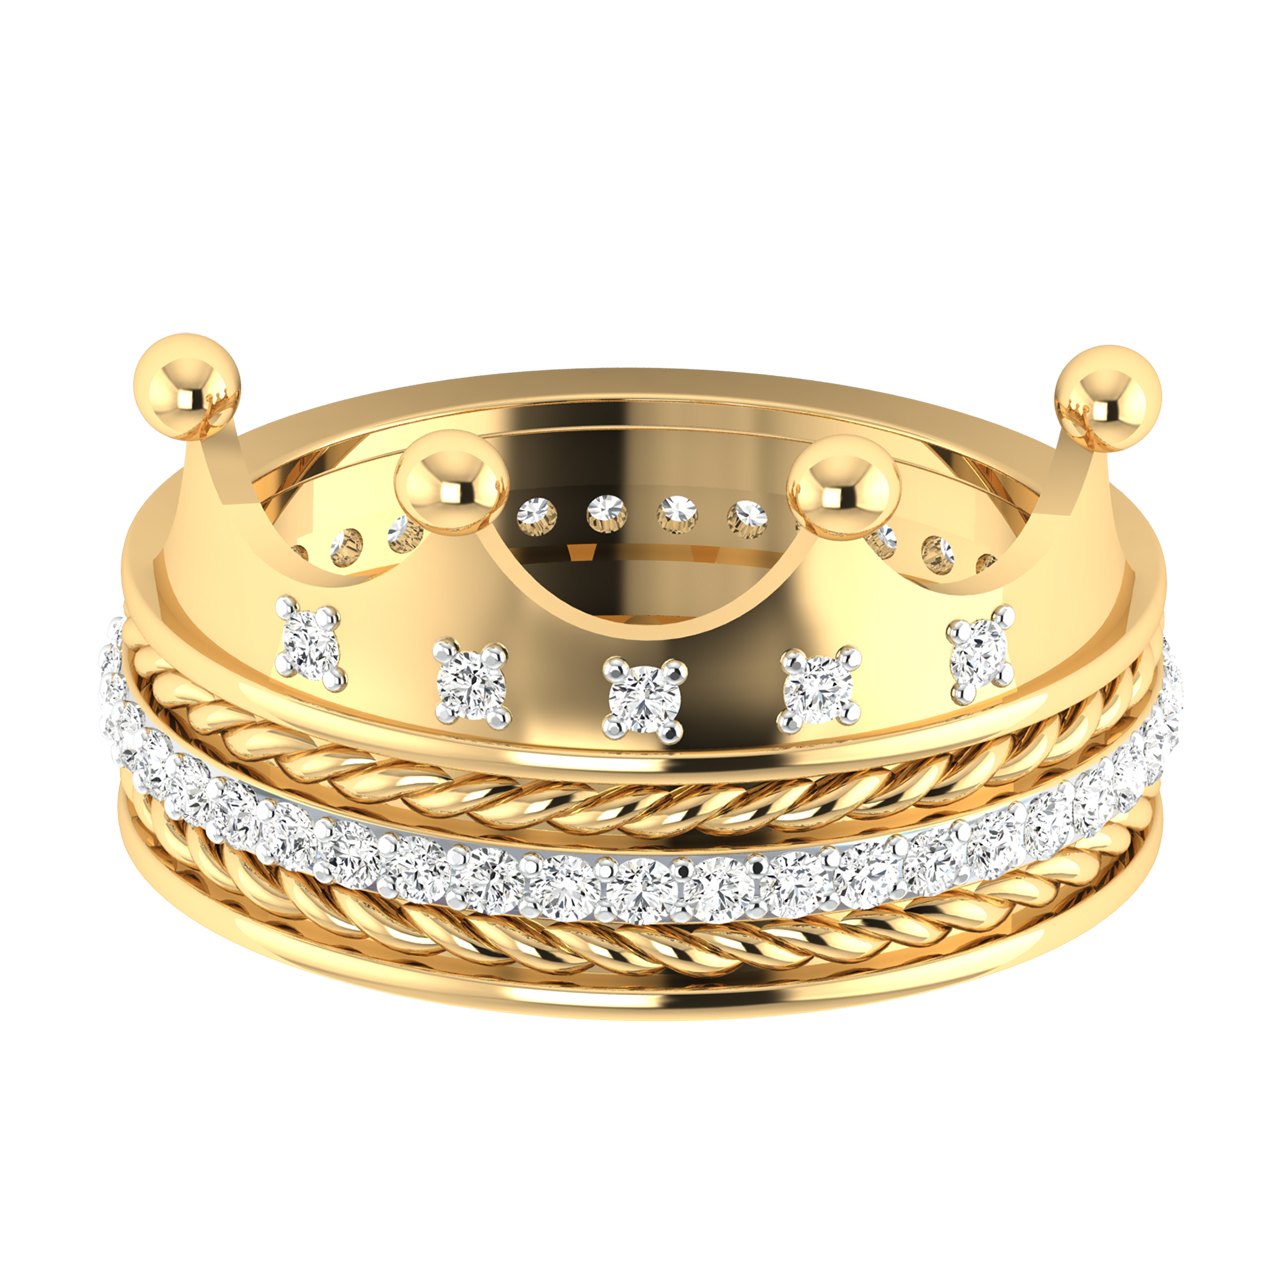 King and Queen Rings, King & Queen Rings, King Queen Wedding Bands, King  Ring, Queen Ring, Matching Ring Set, 2 Piece Couple Set 14K Yellow Gold  Tungsten Rings King & Queen Rings